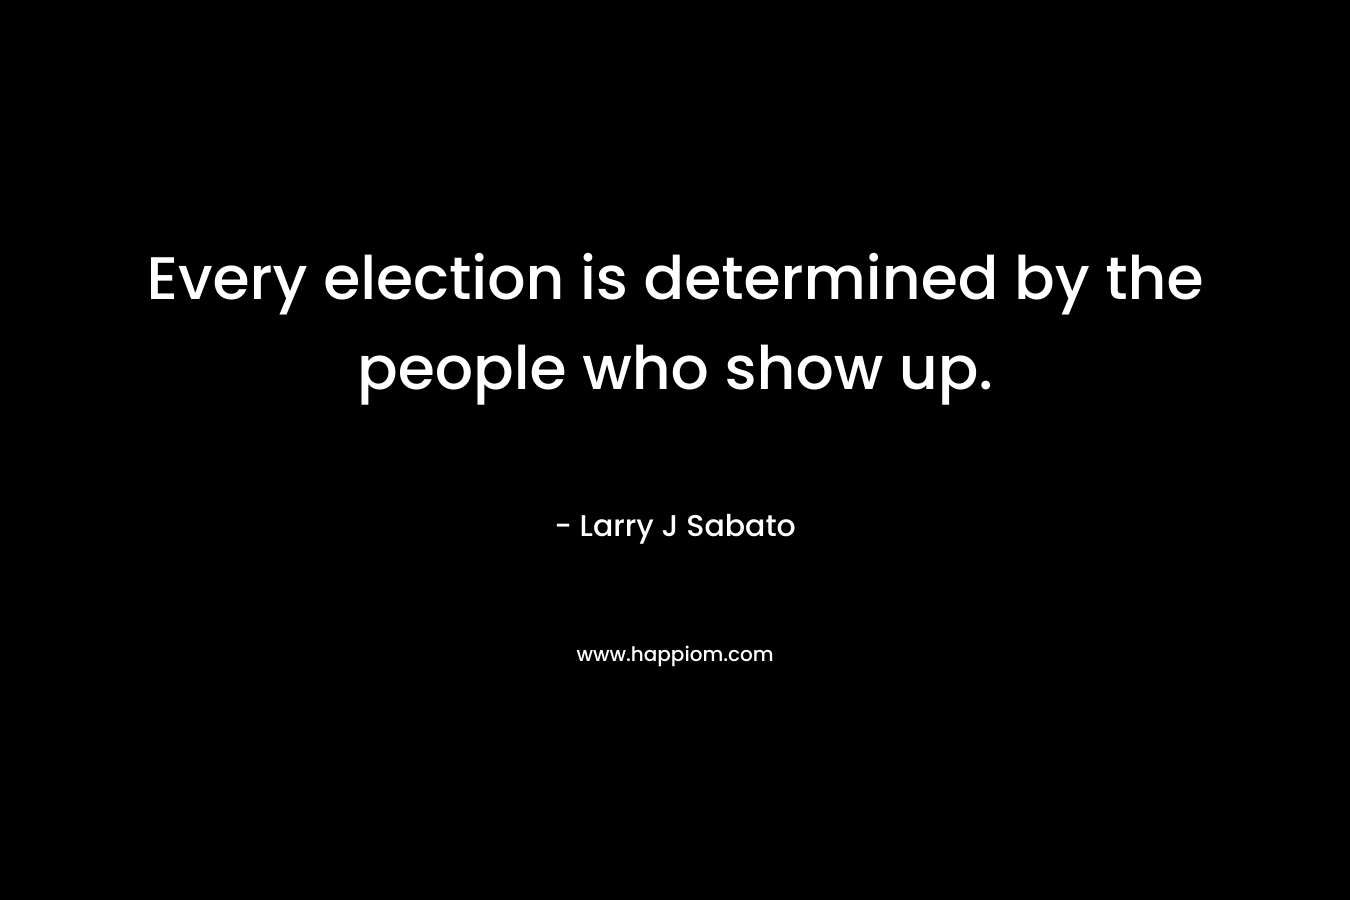 Every election is determined by the people who show up.